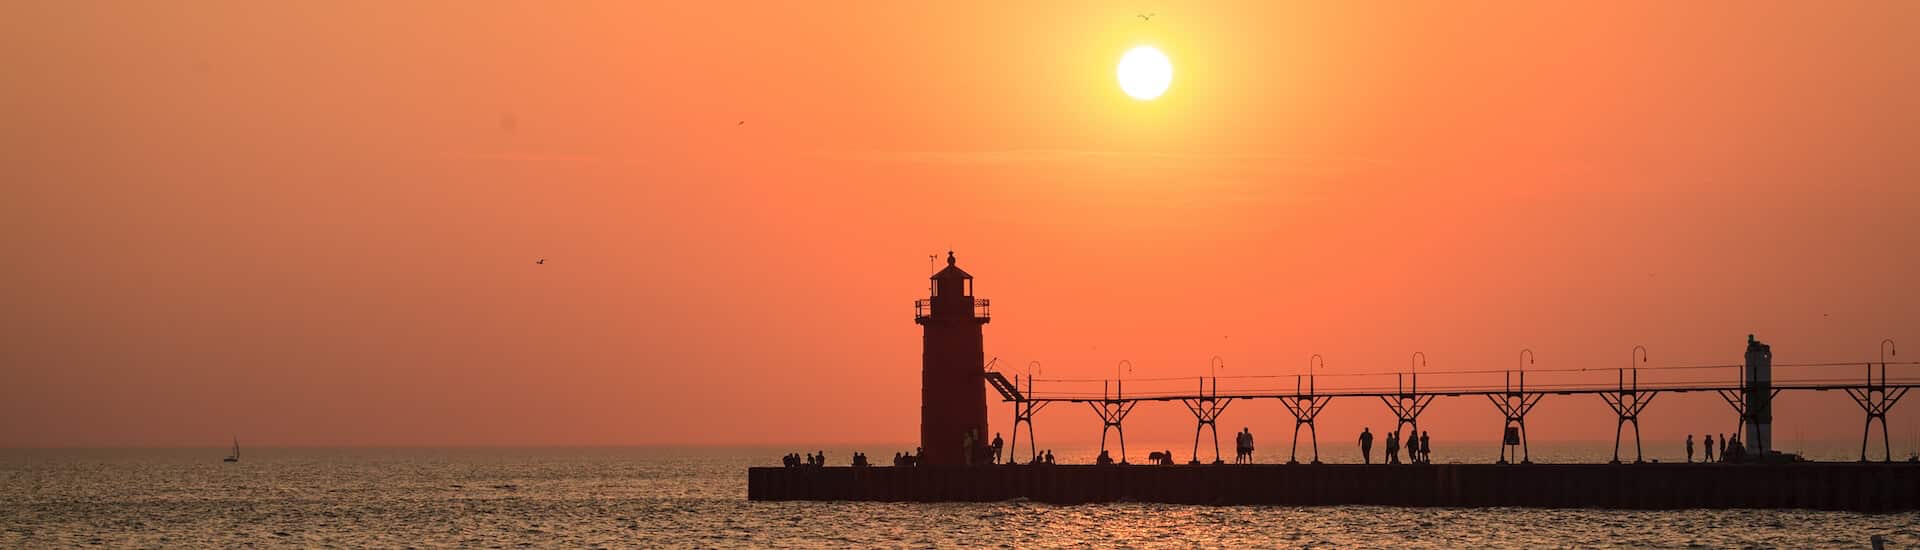 A sunset view of a lighthouse on a pier